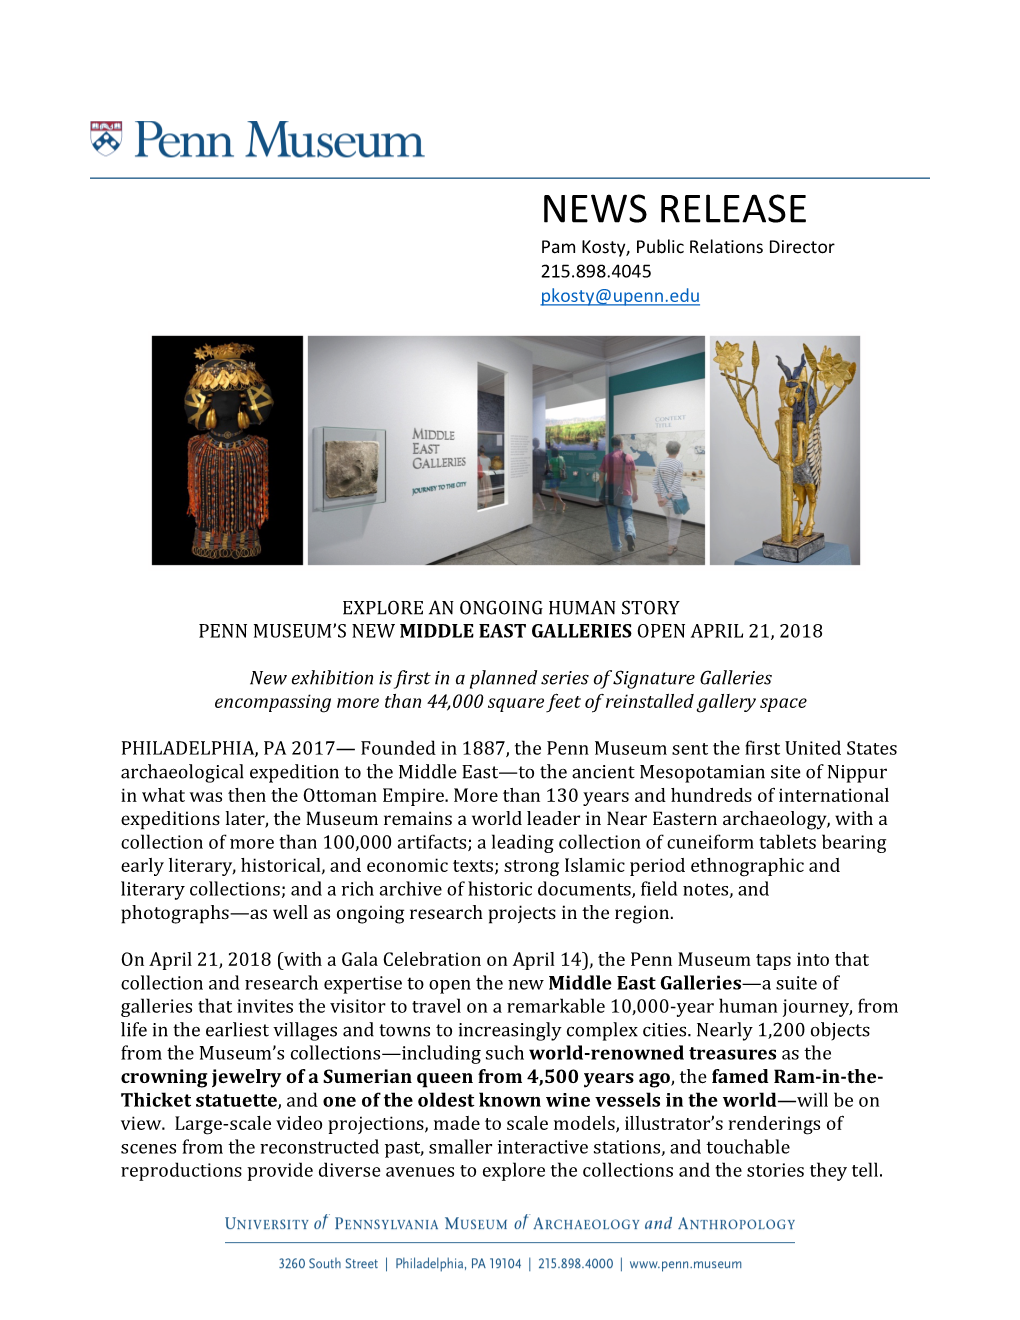 Middle East Galleries Press Release 01/30/2018